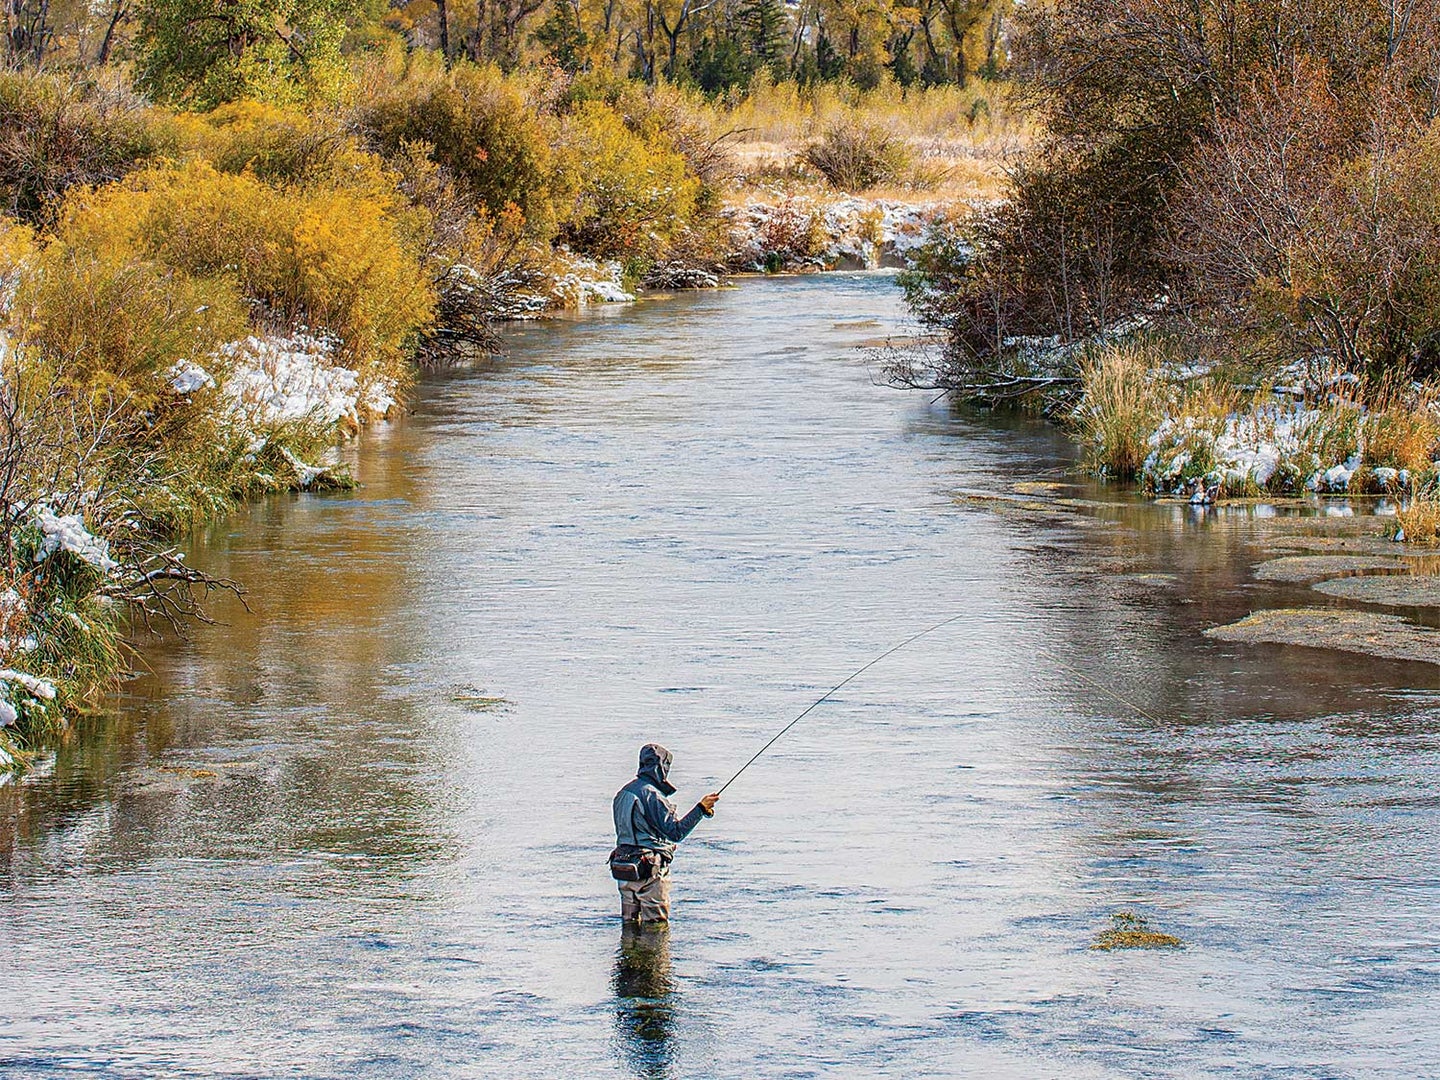 A fly angler fishing for steelhead trout in a stream.